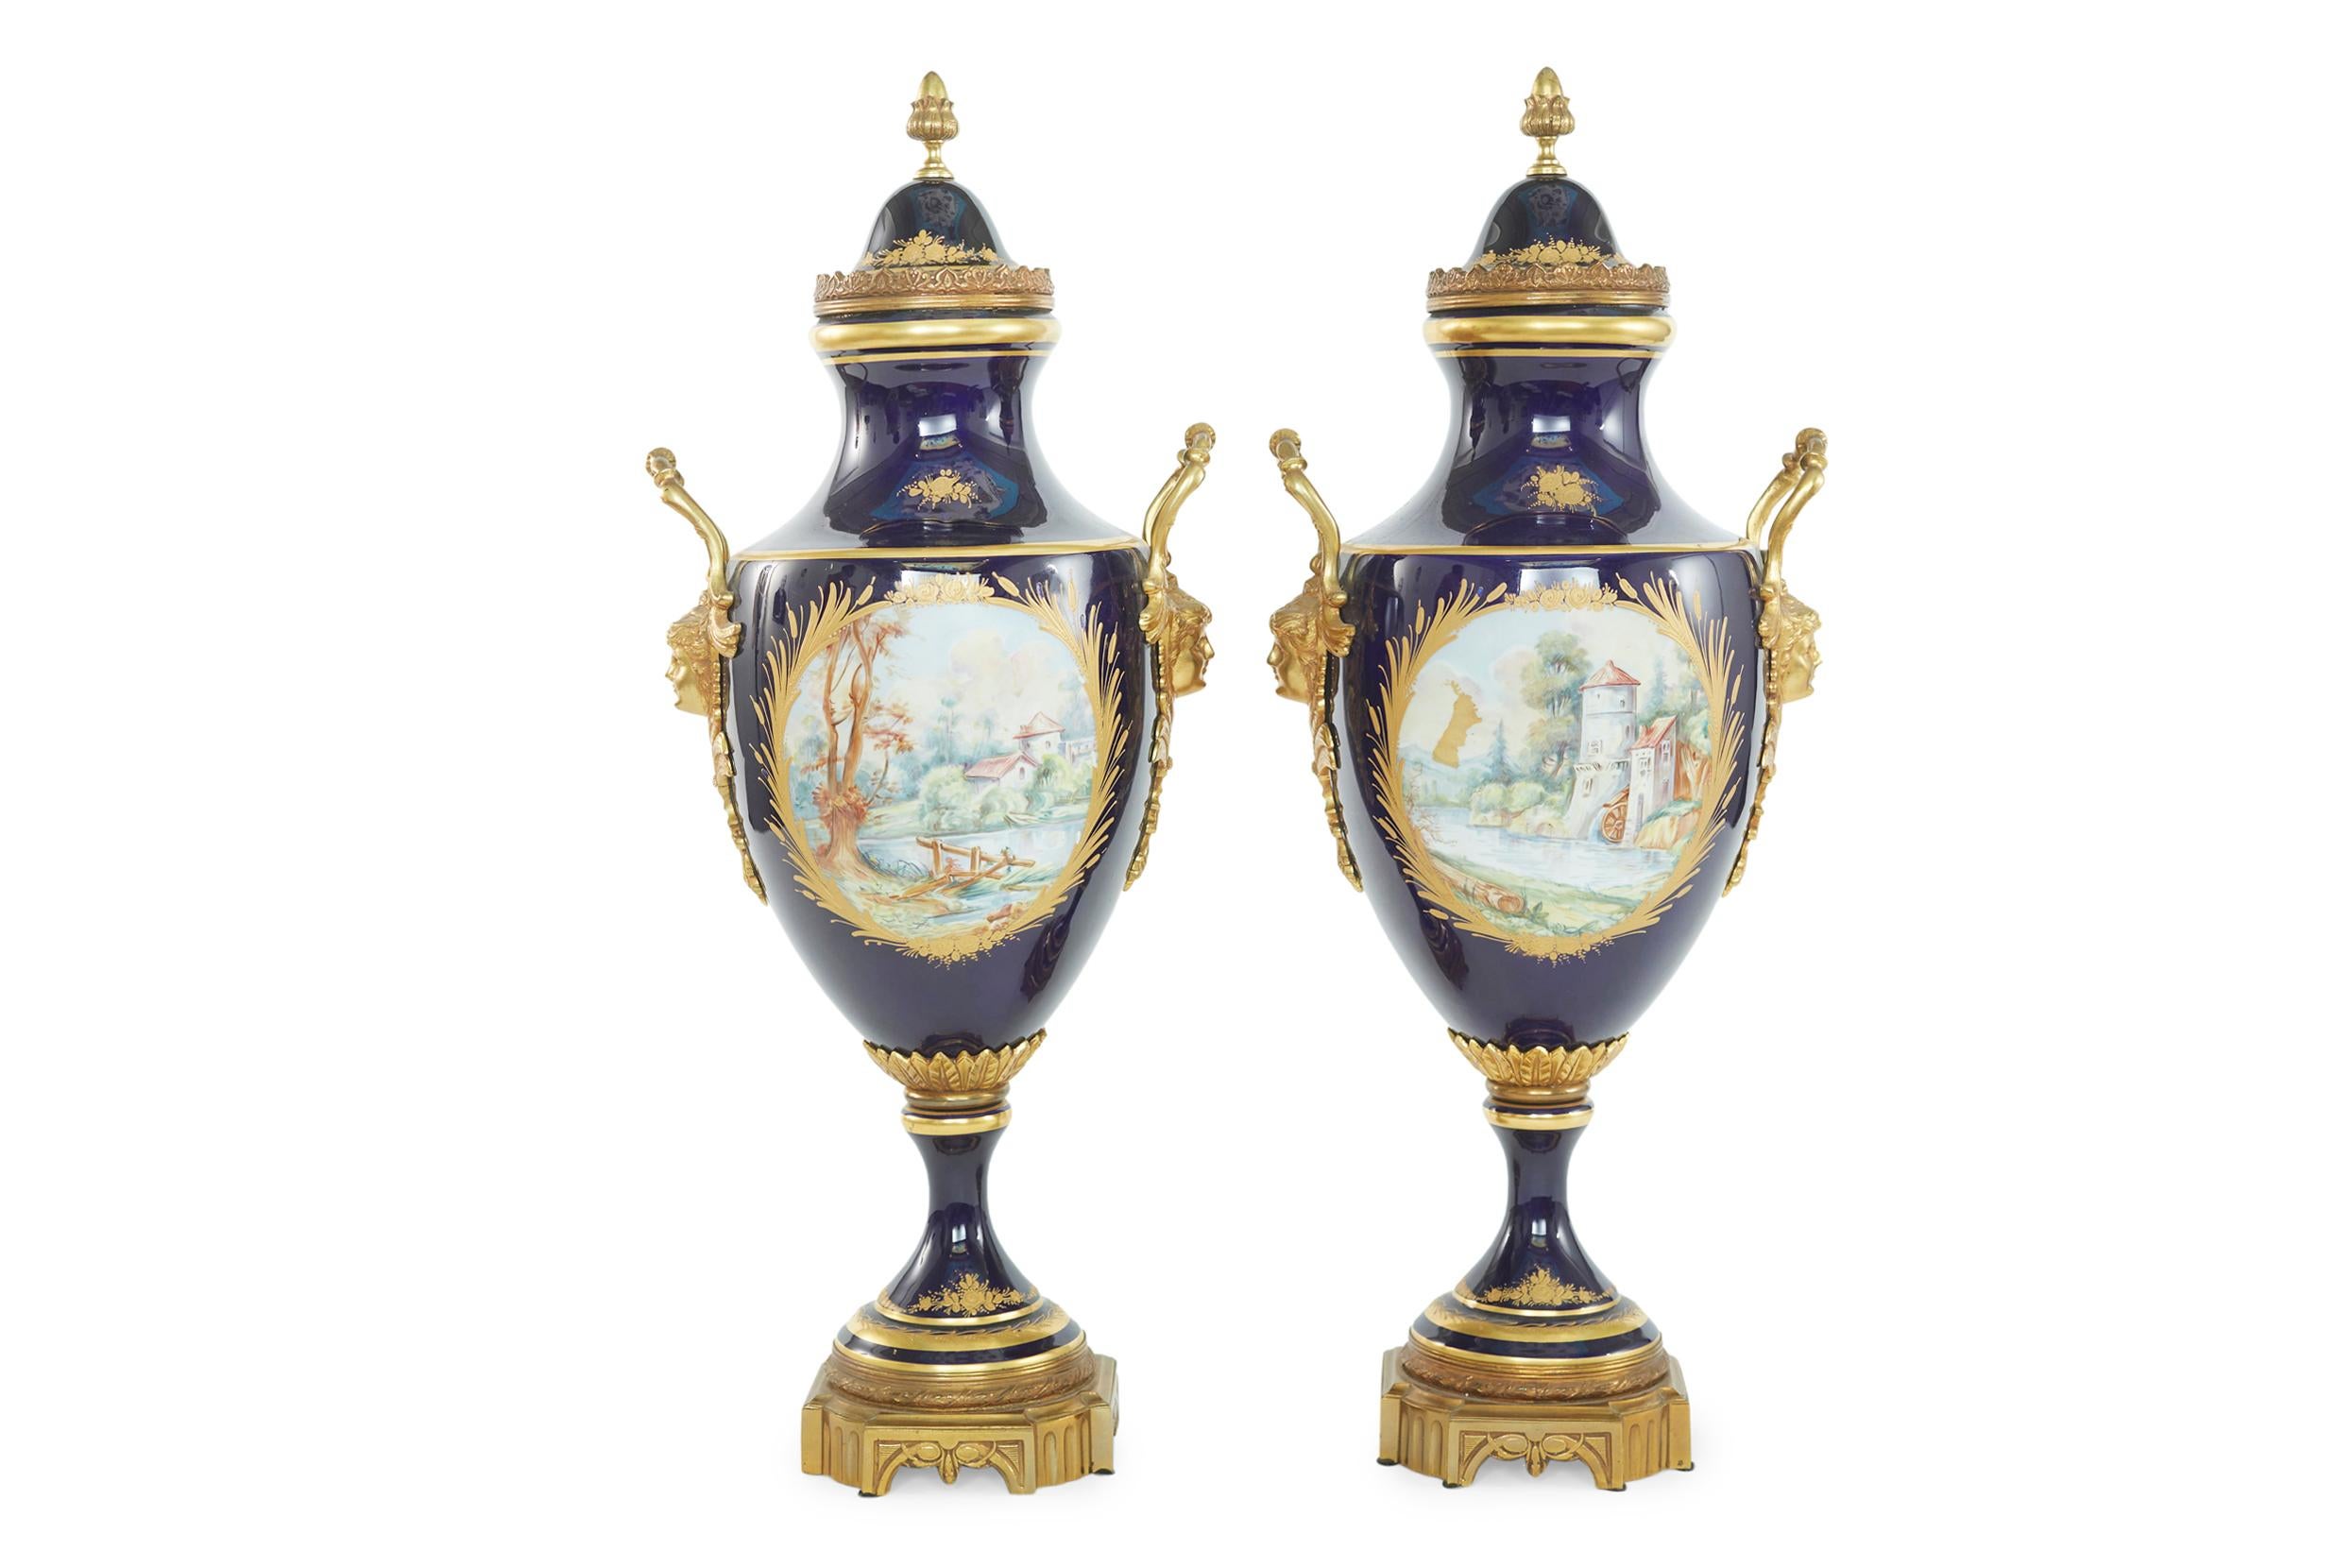 19th Century gilt bronze mounted Sevres porcelain decorative enameled covered pair of urn. Each urn features exterior hand painted scene details by 